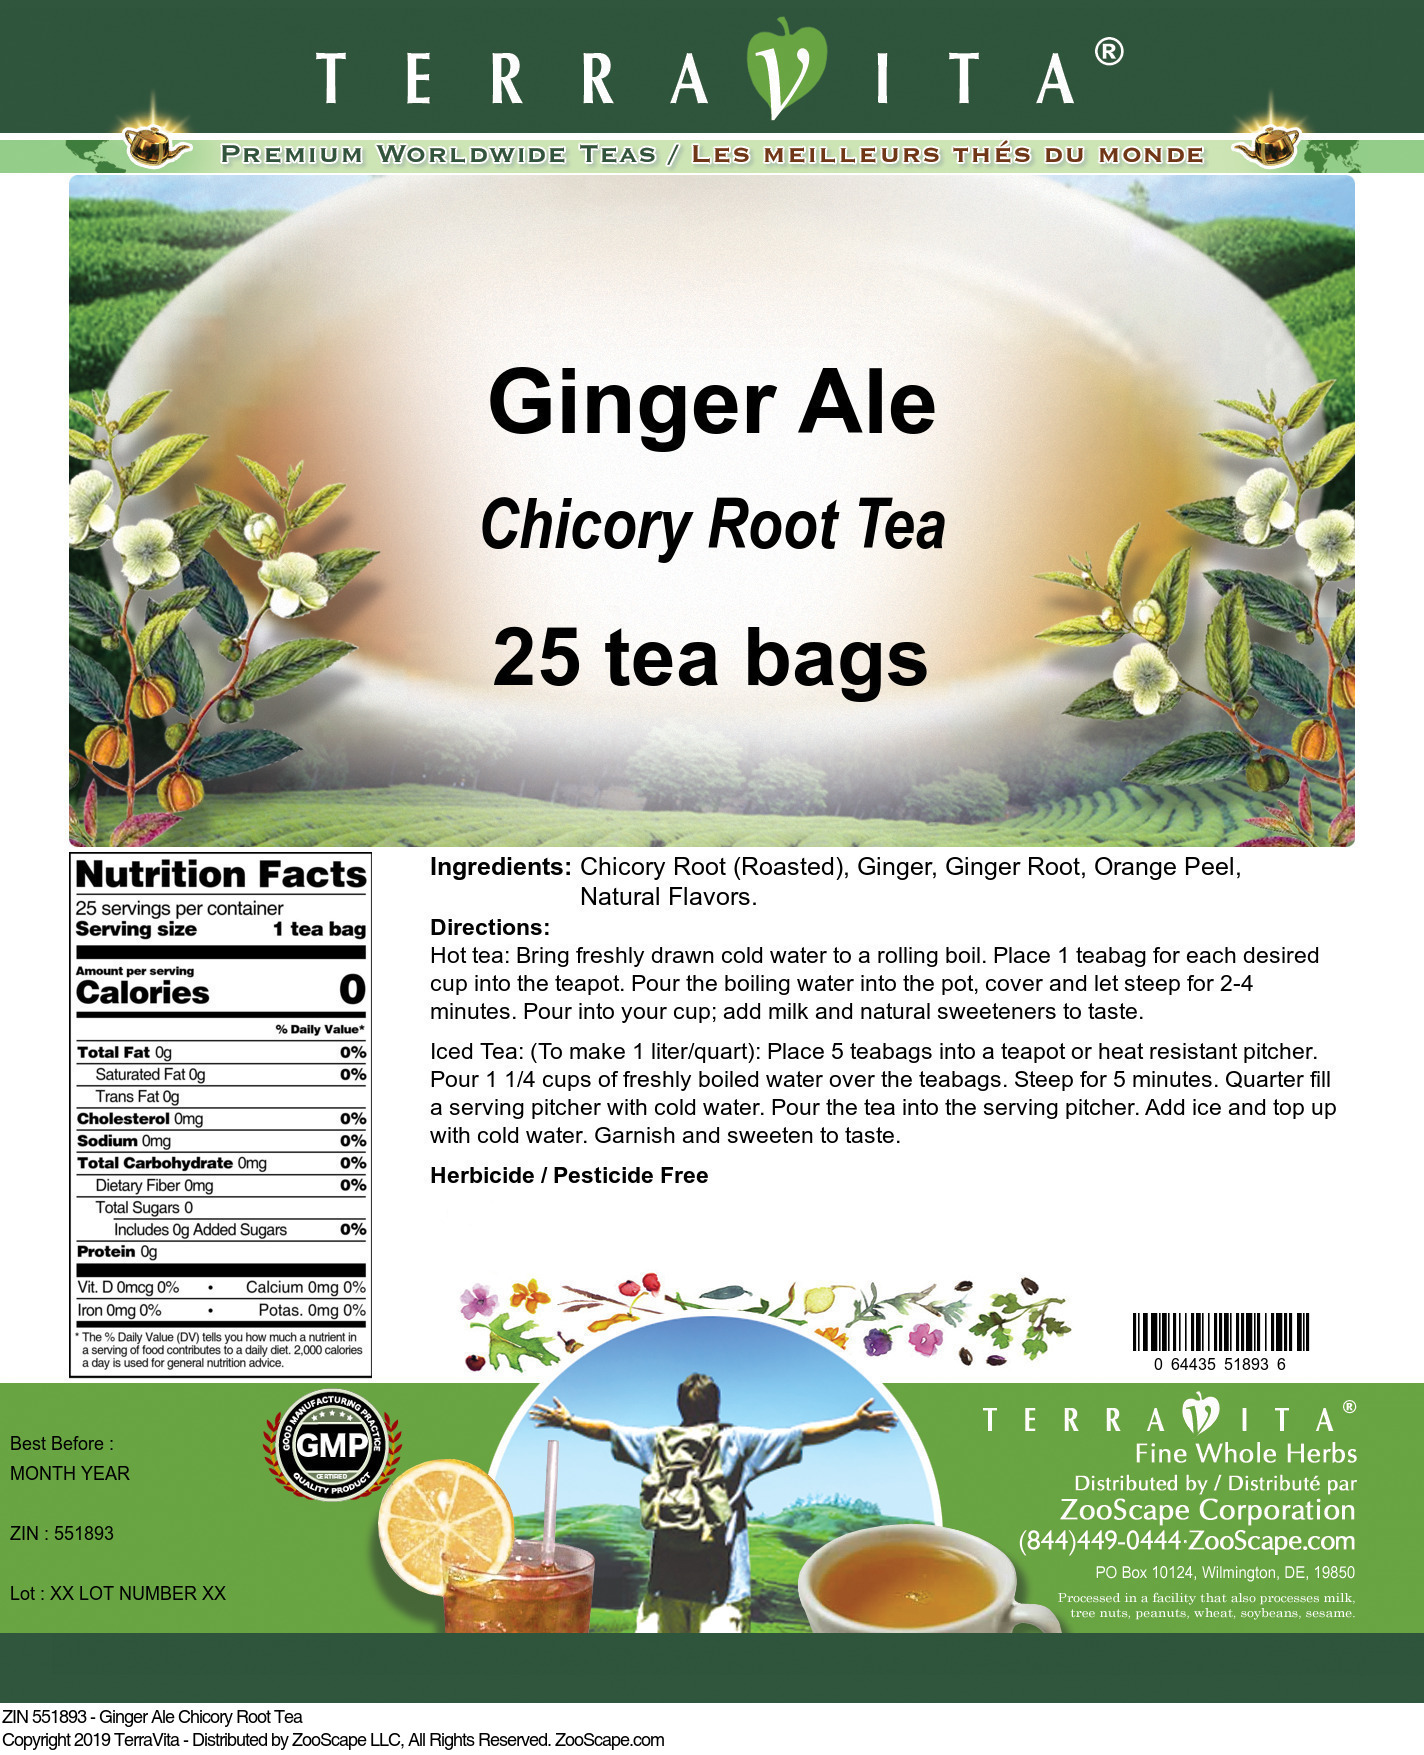 Ginger Ale Chicory Root Tea - Label